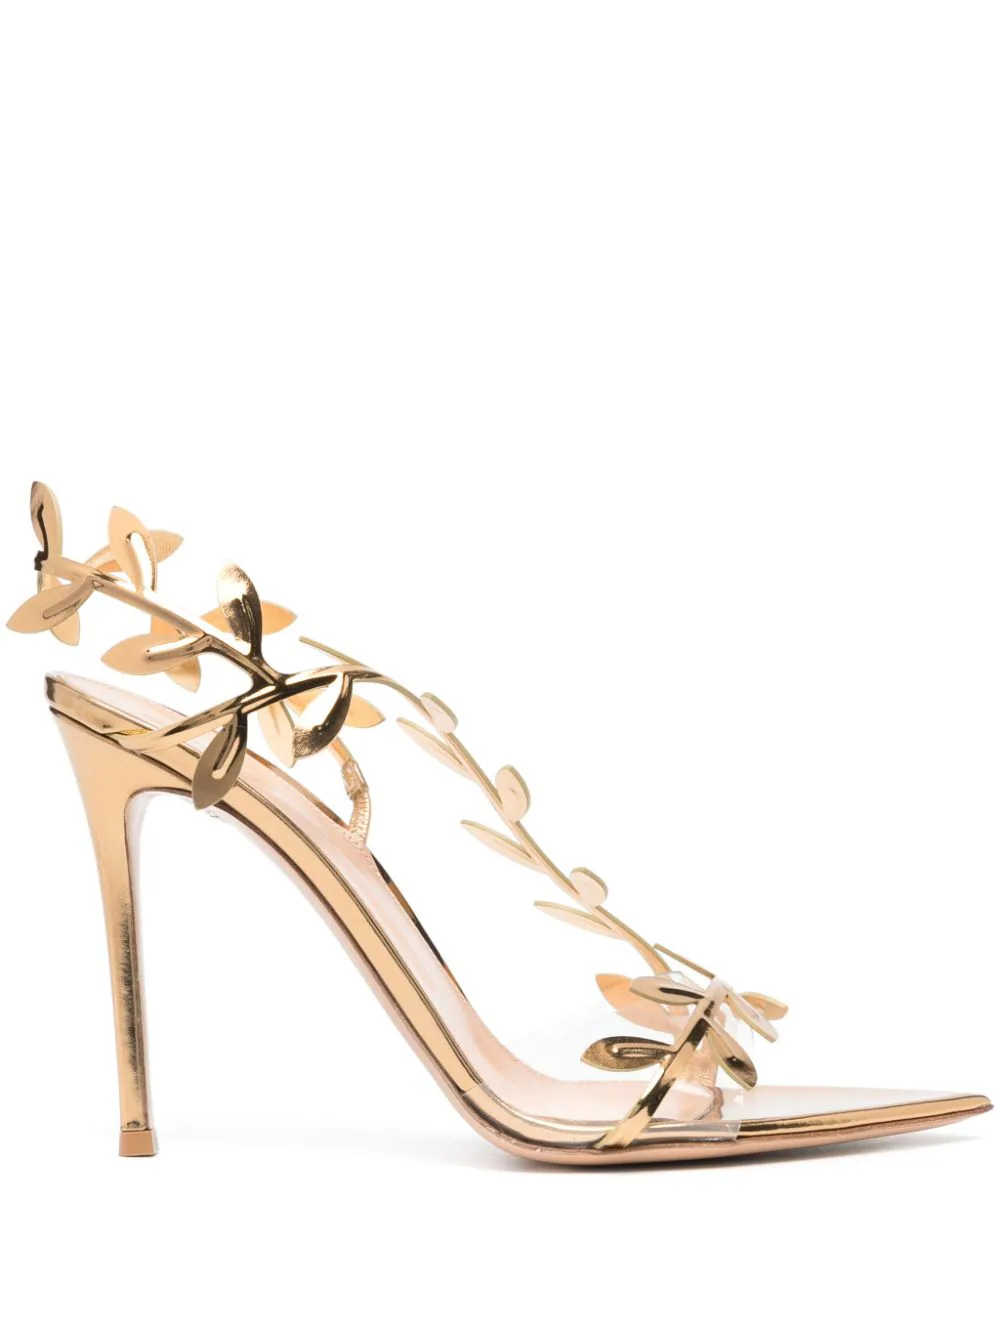 Gianvito Rossi Flavia 105mm Leather Sandals In Gold